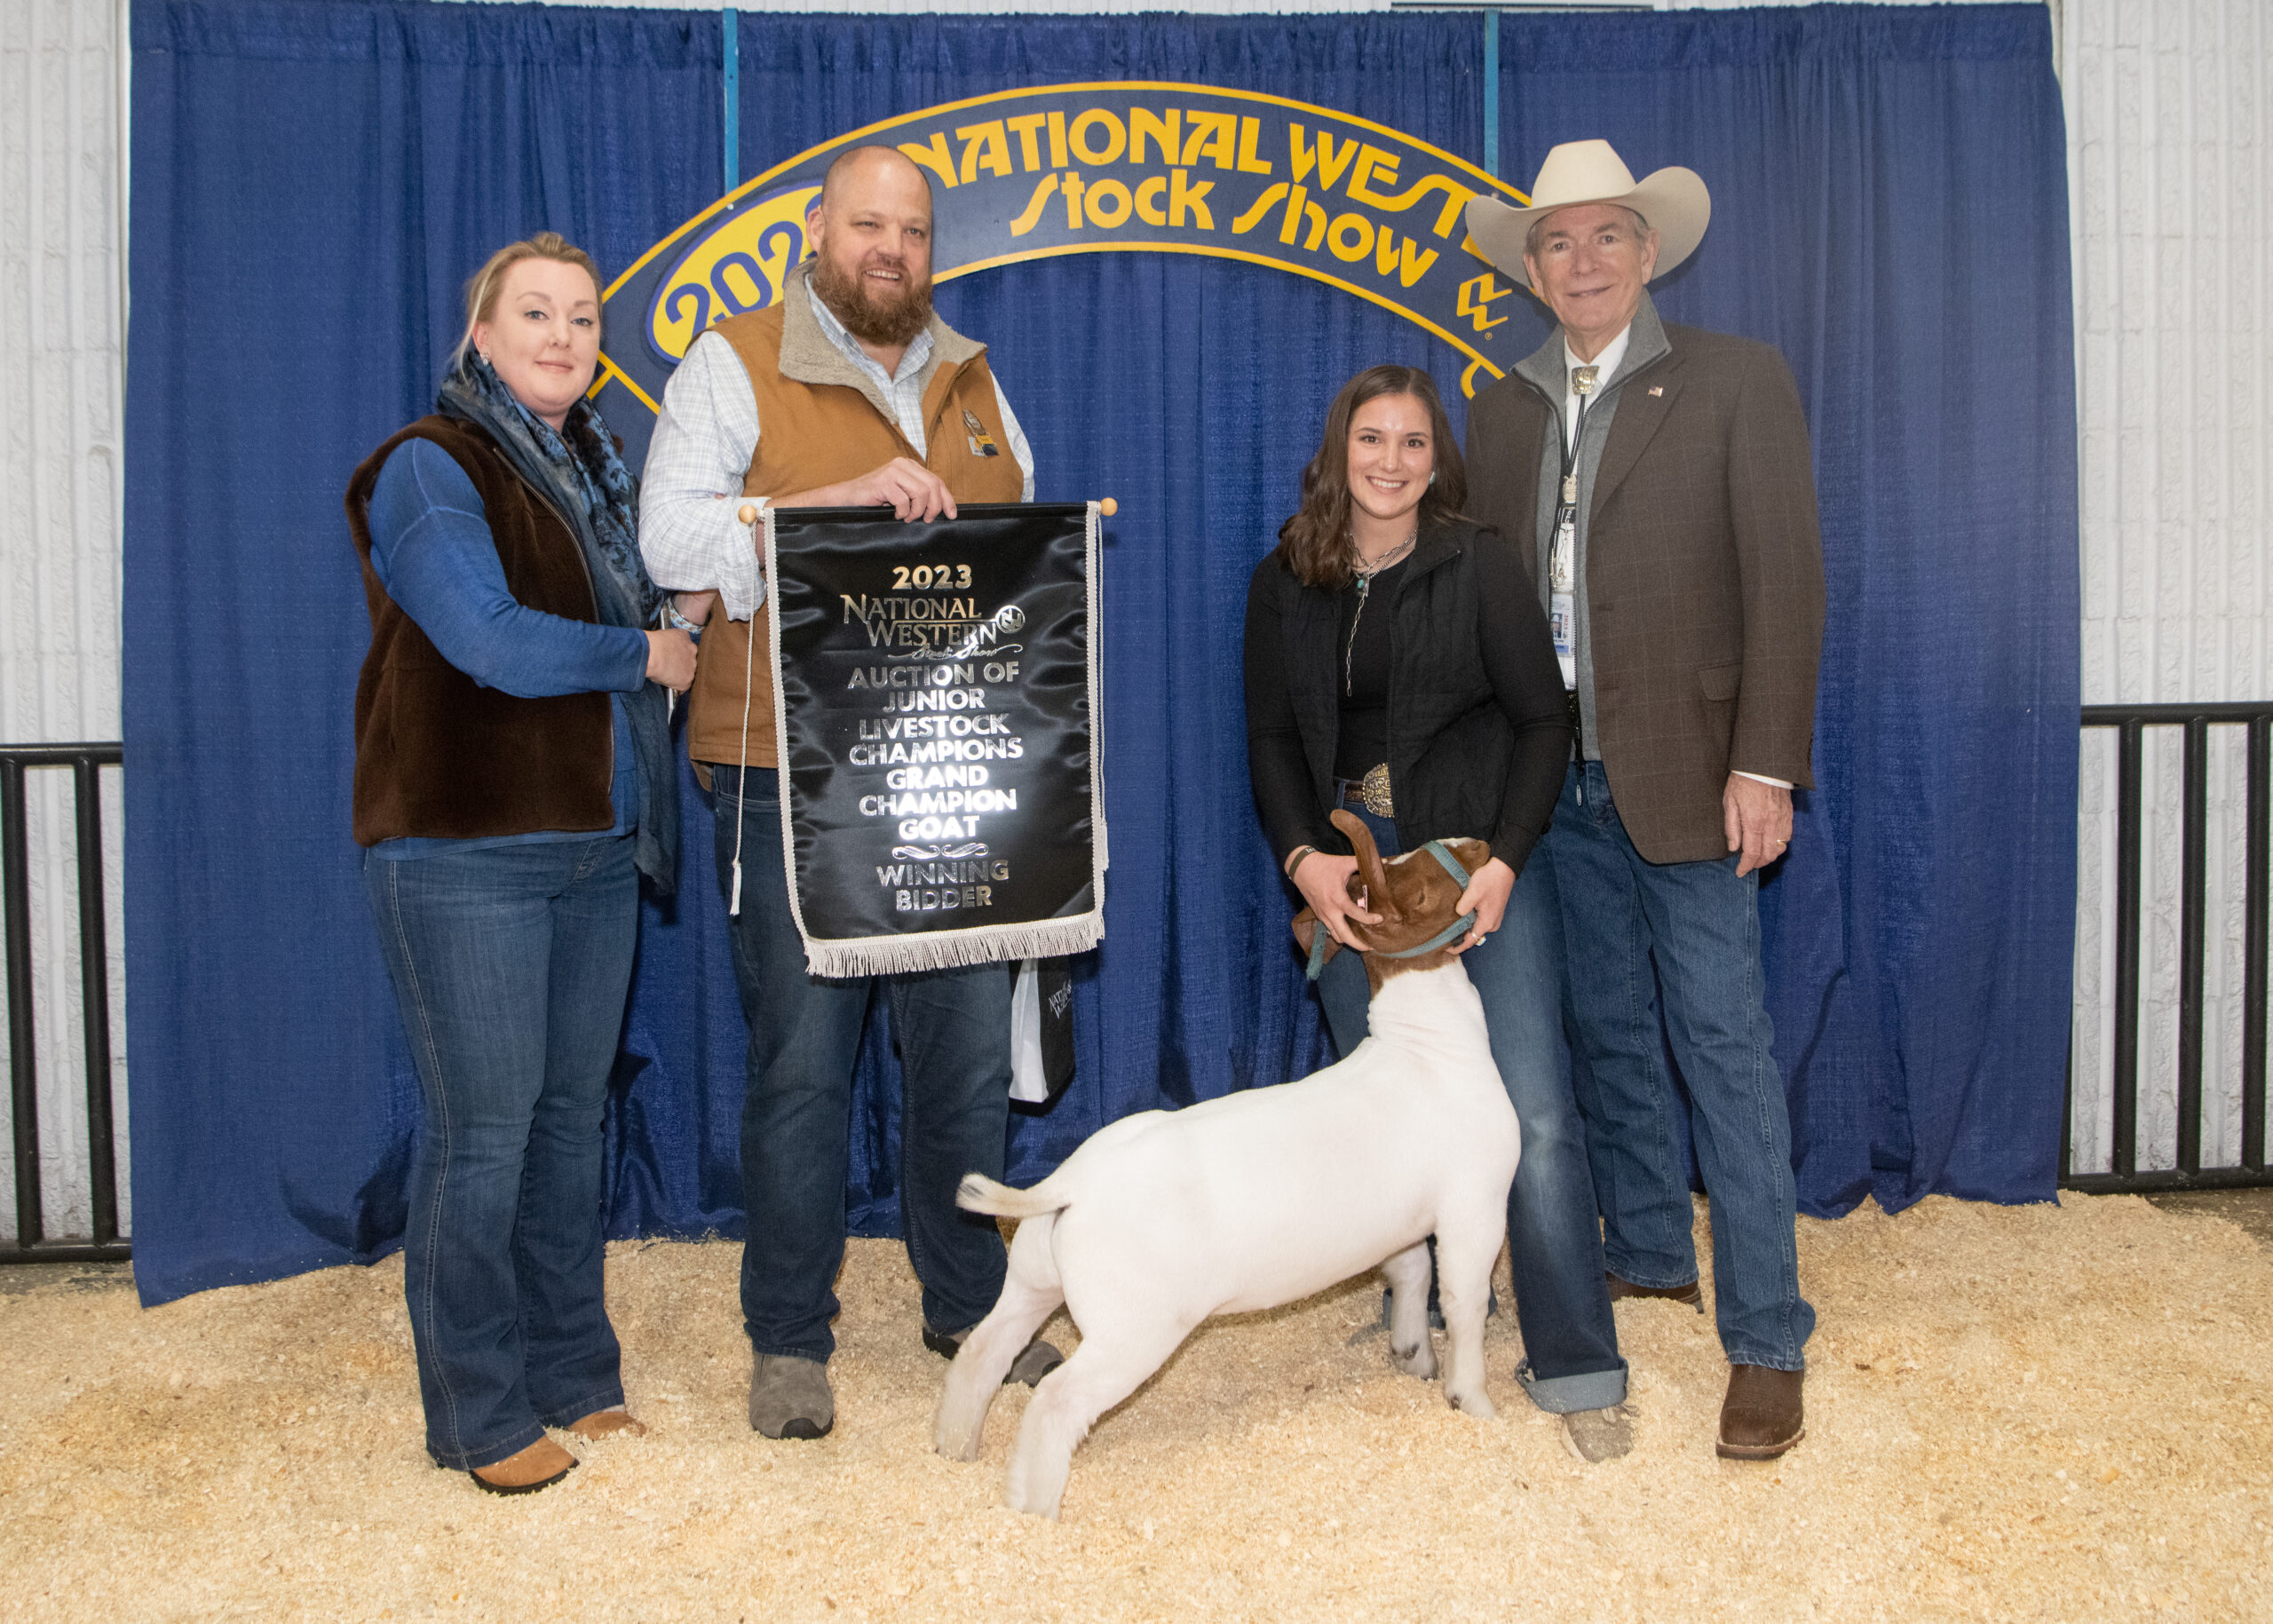 2020 Grand Champion Goat winner: Cody Sells, and Buyer: Babson Farms